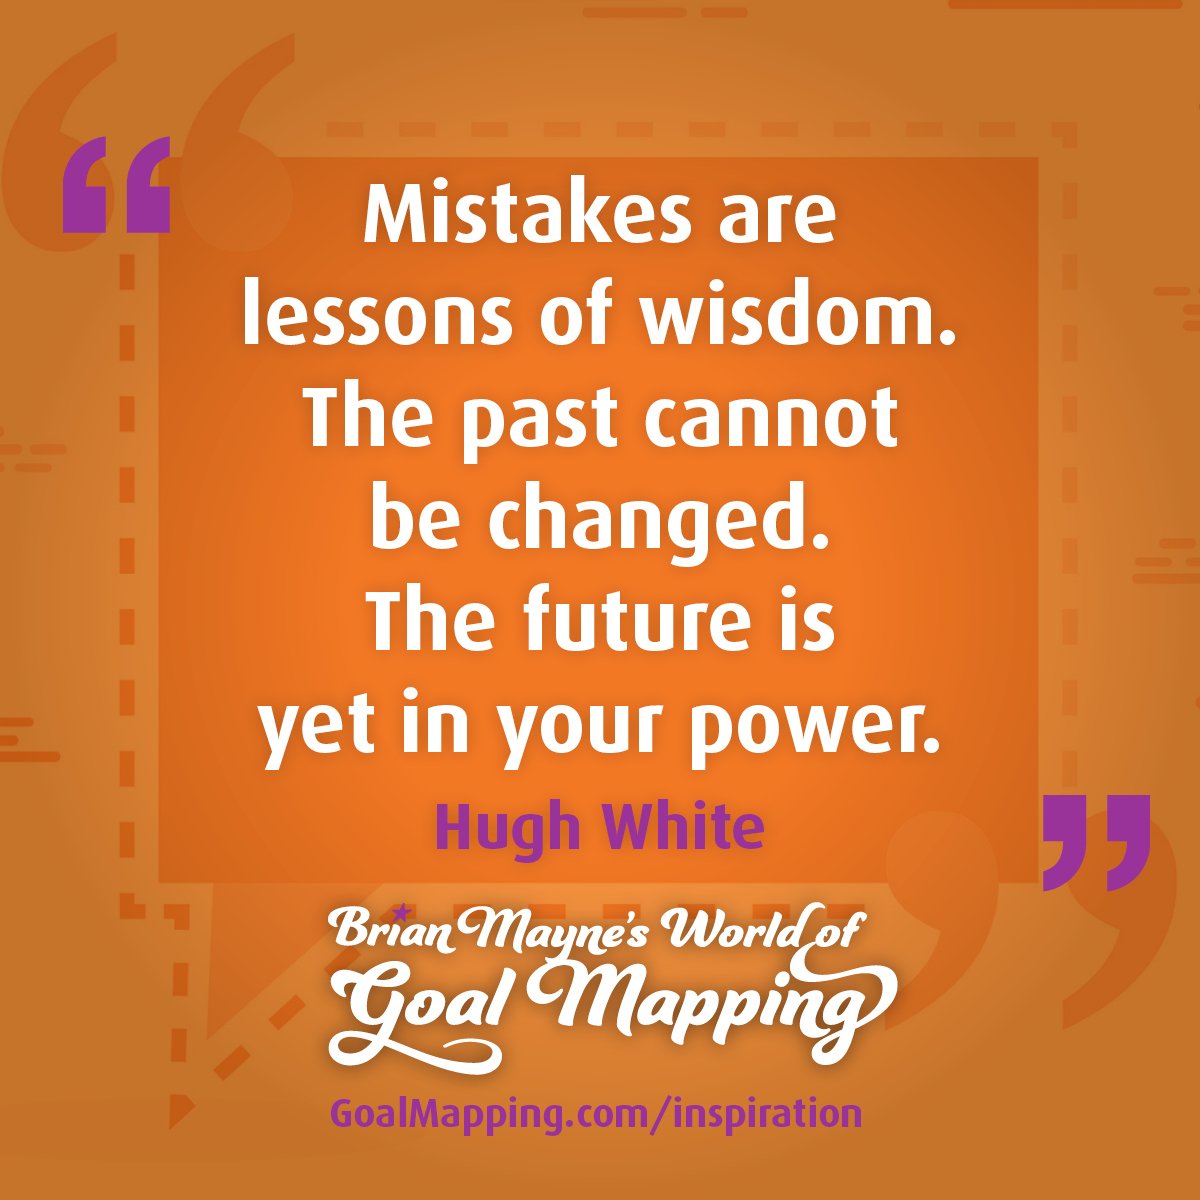 "Mistakes are lessons of wisdom. The past cannot be changed. The future is yet in your power." Hugh White